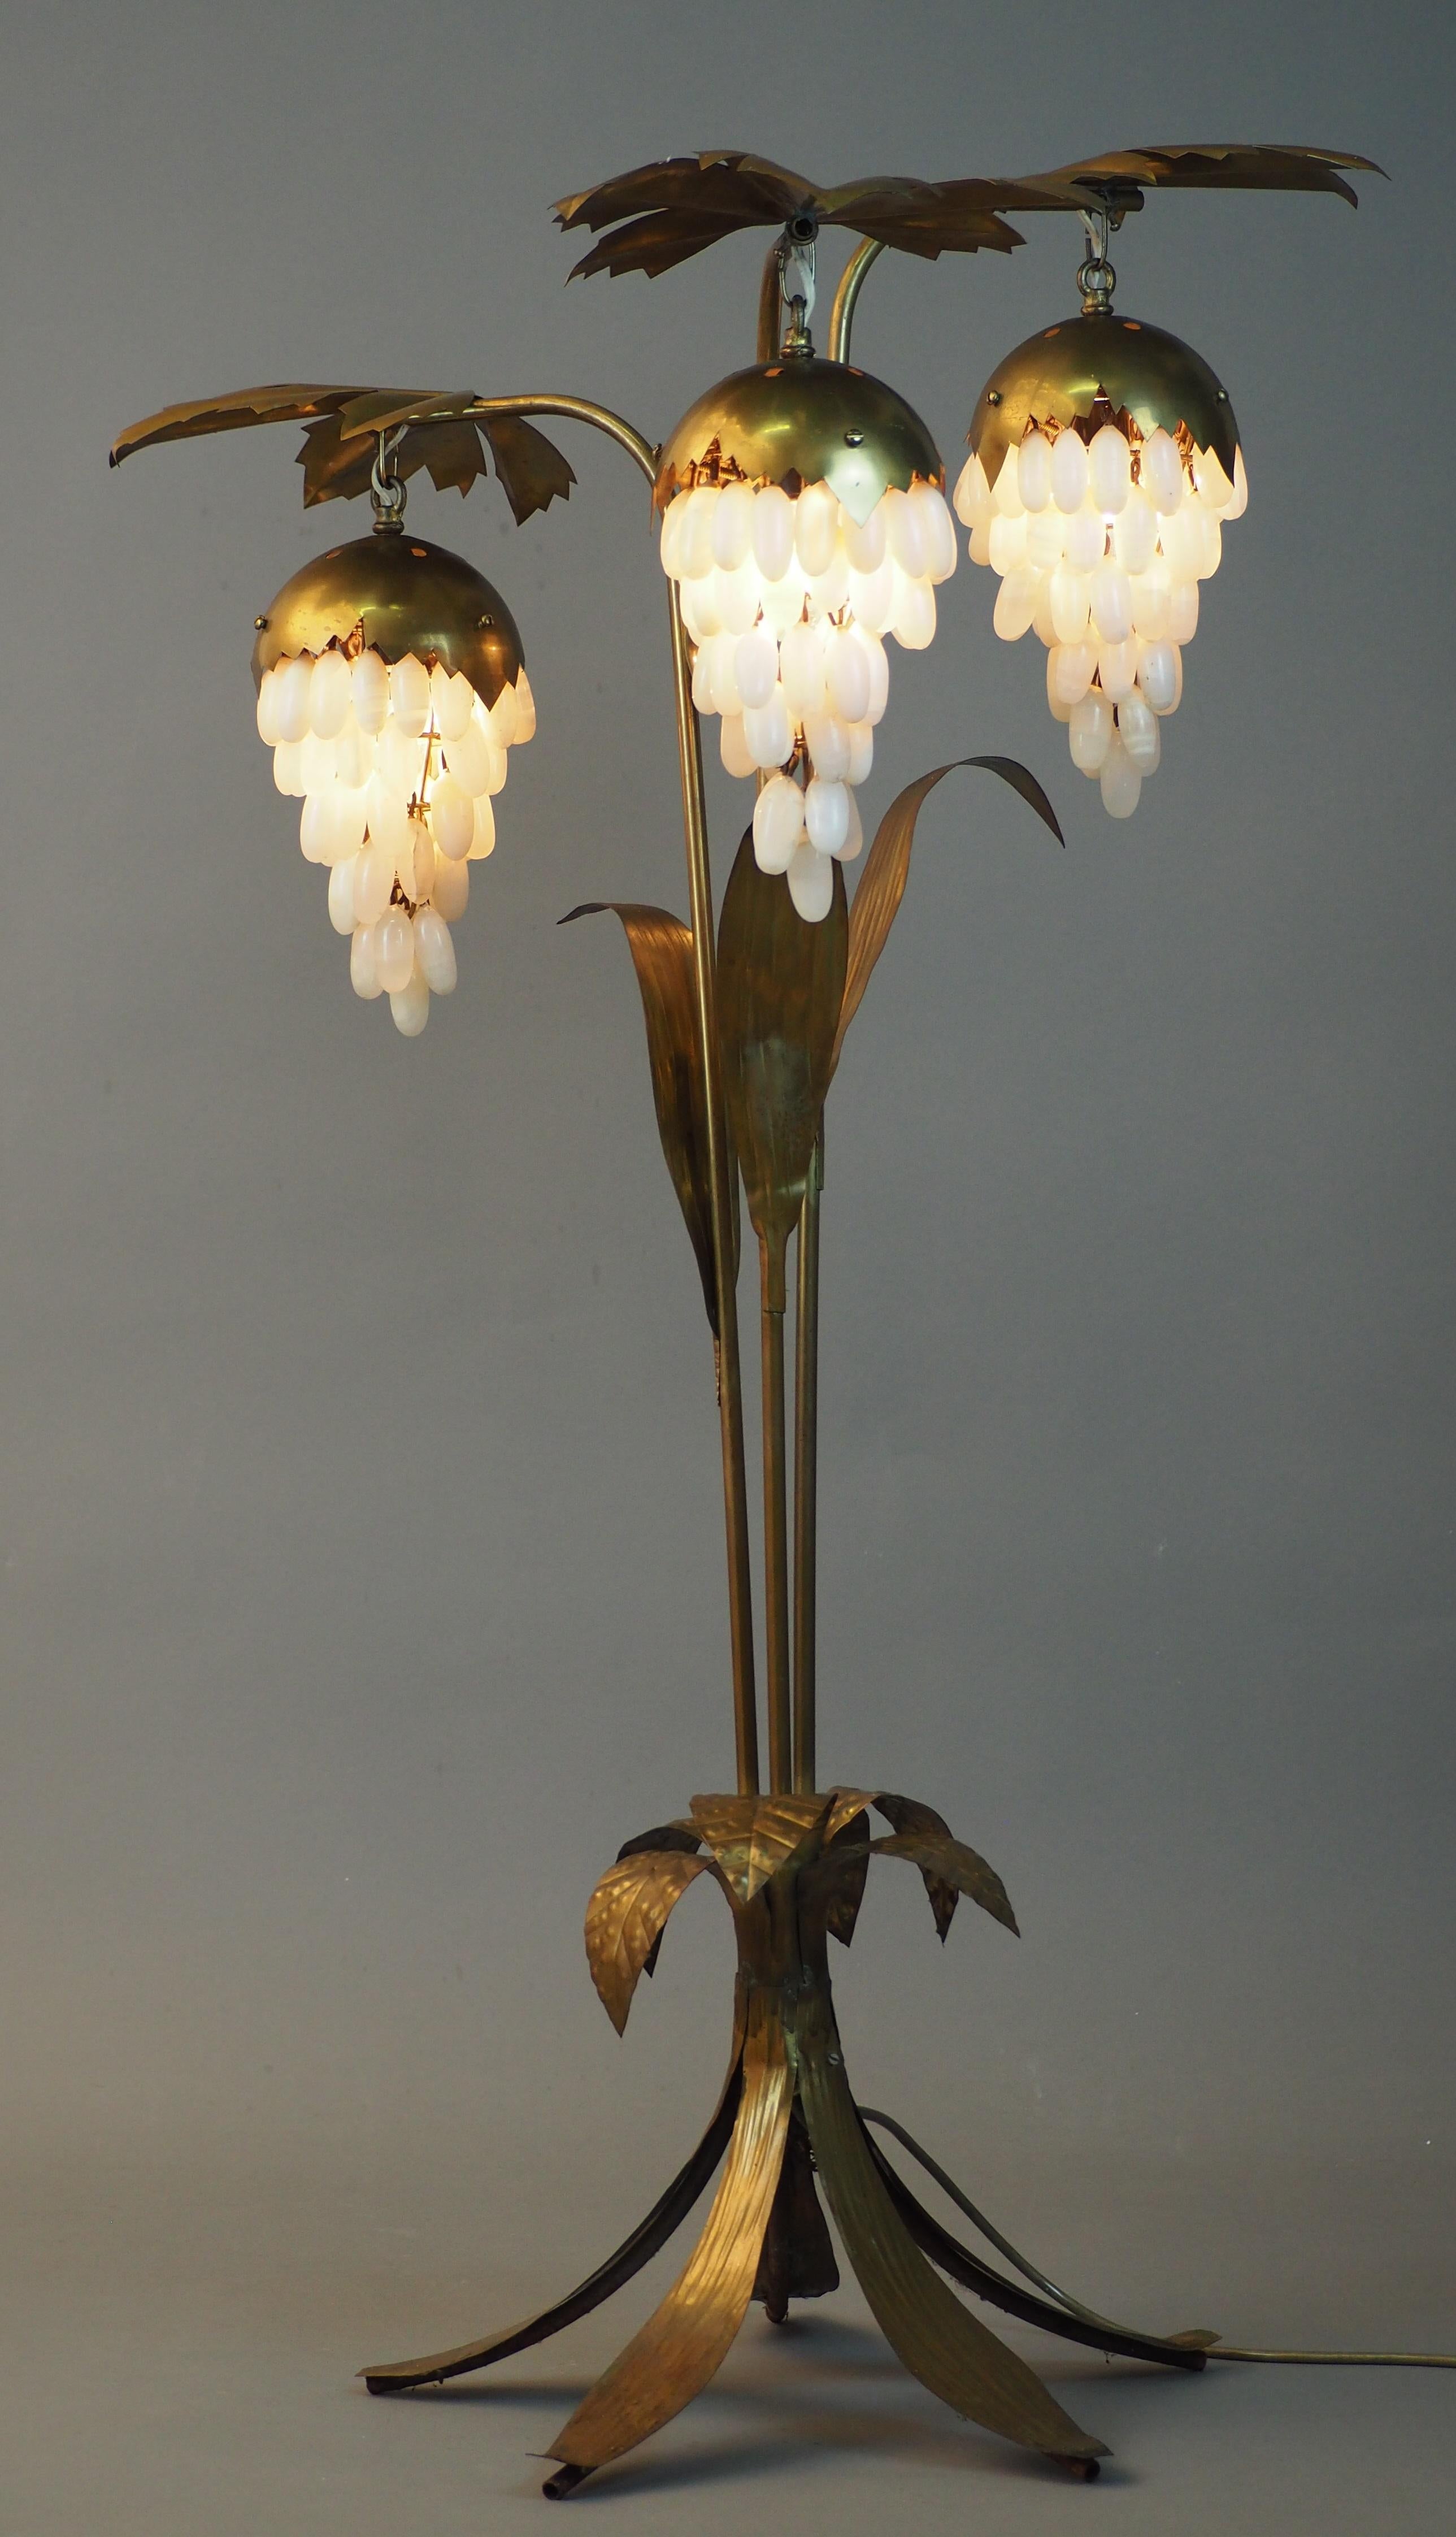 A wonderful Italian or German floor lamp with original alabaster grapes shades.
A very interesting design, hand - crafted in the 1950s.
Lamp socket: 3 x e14
Rewired for US standards.